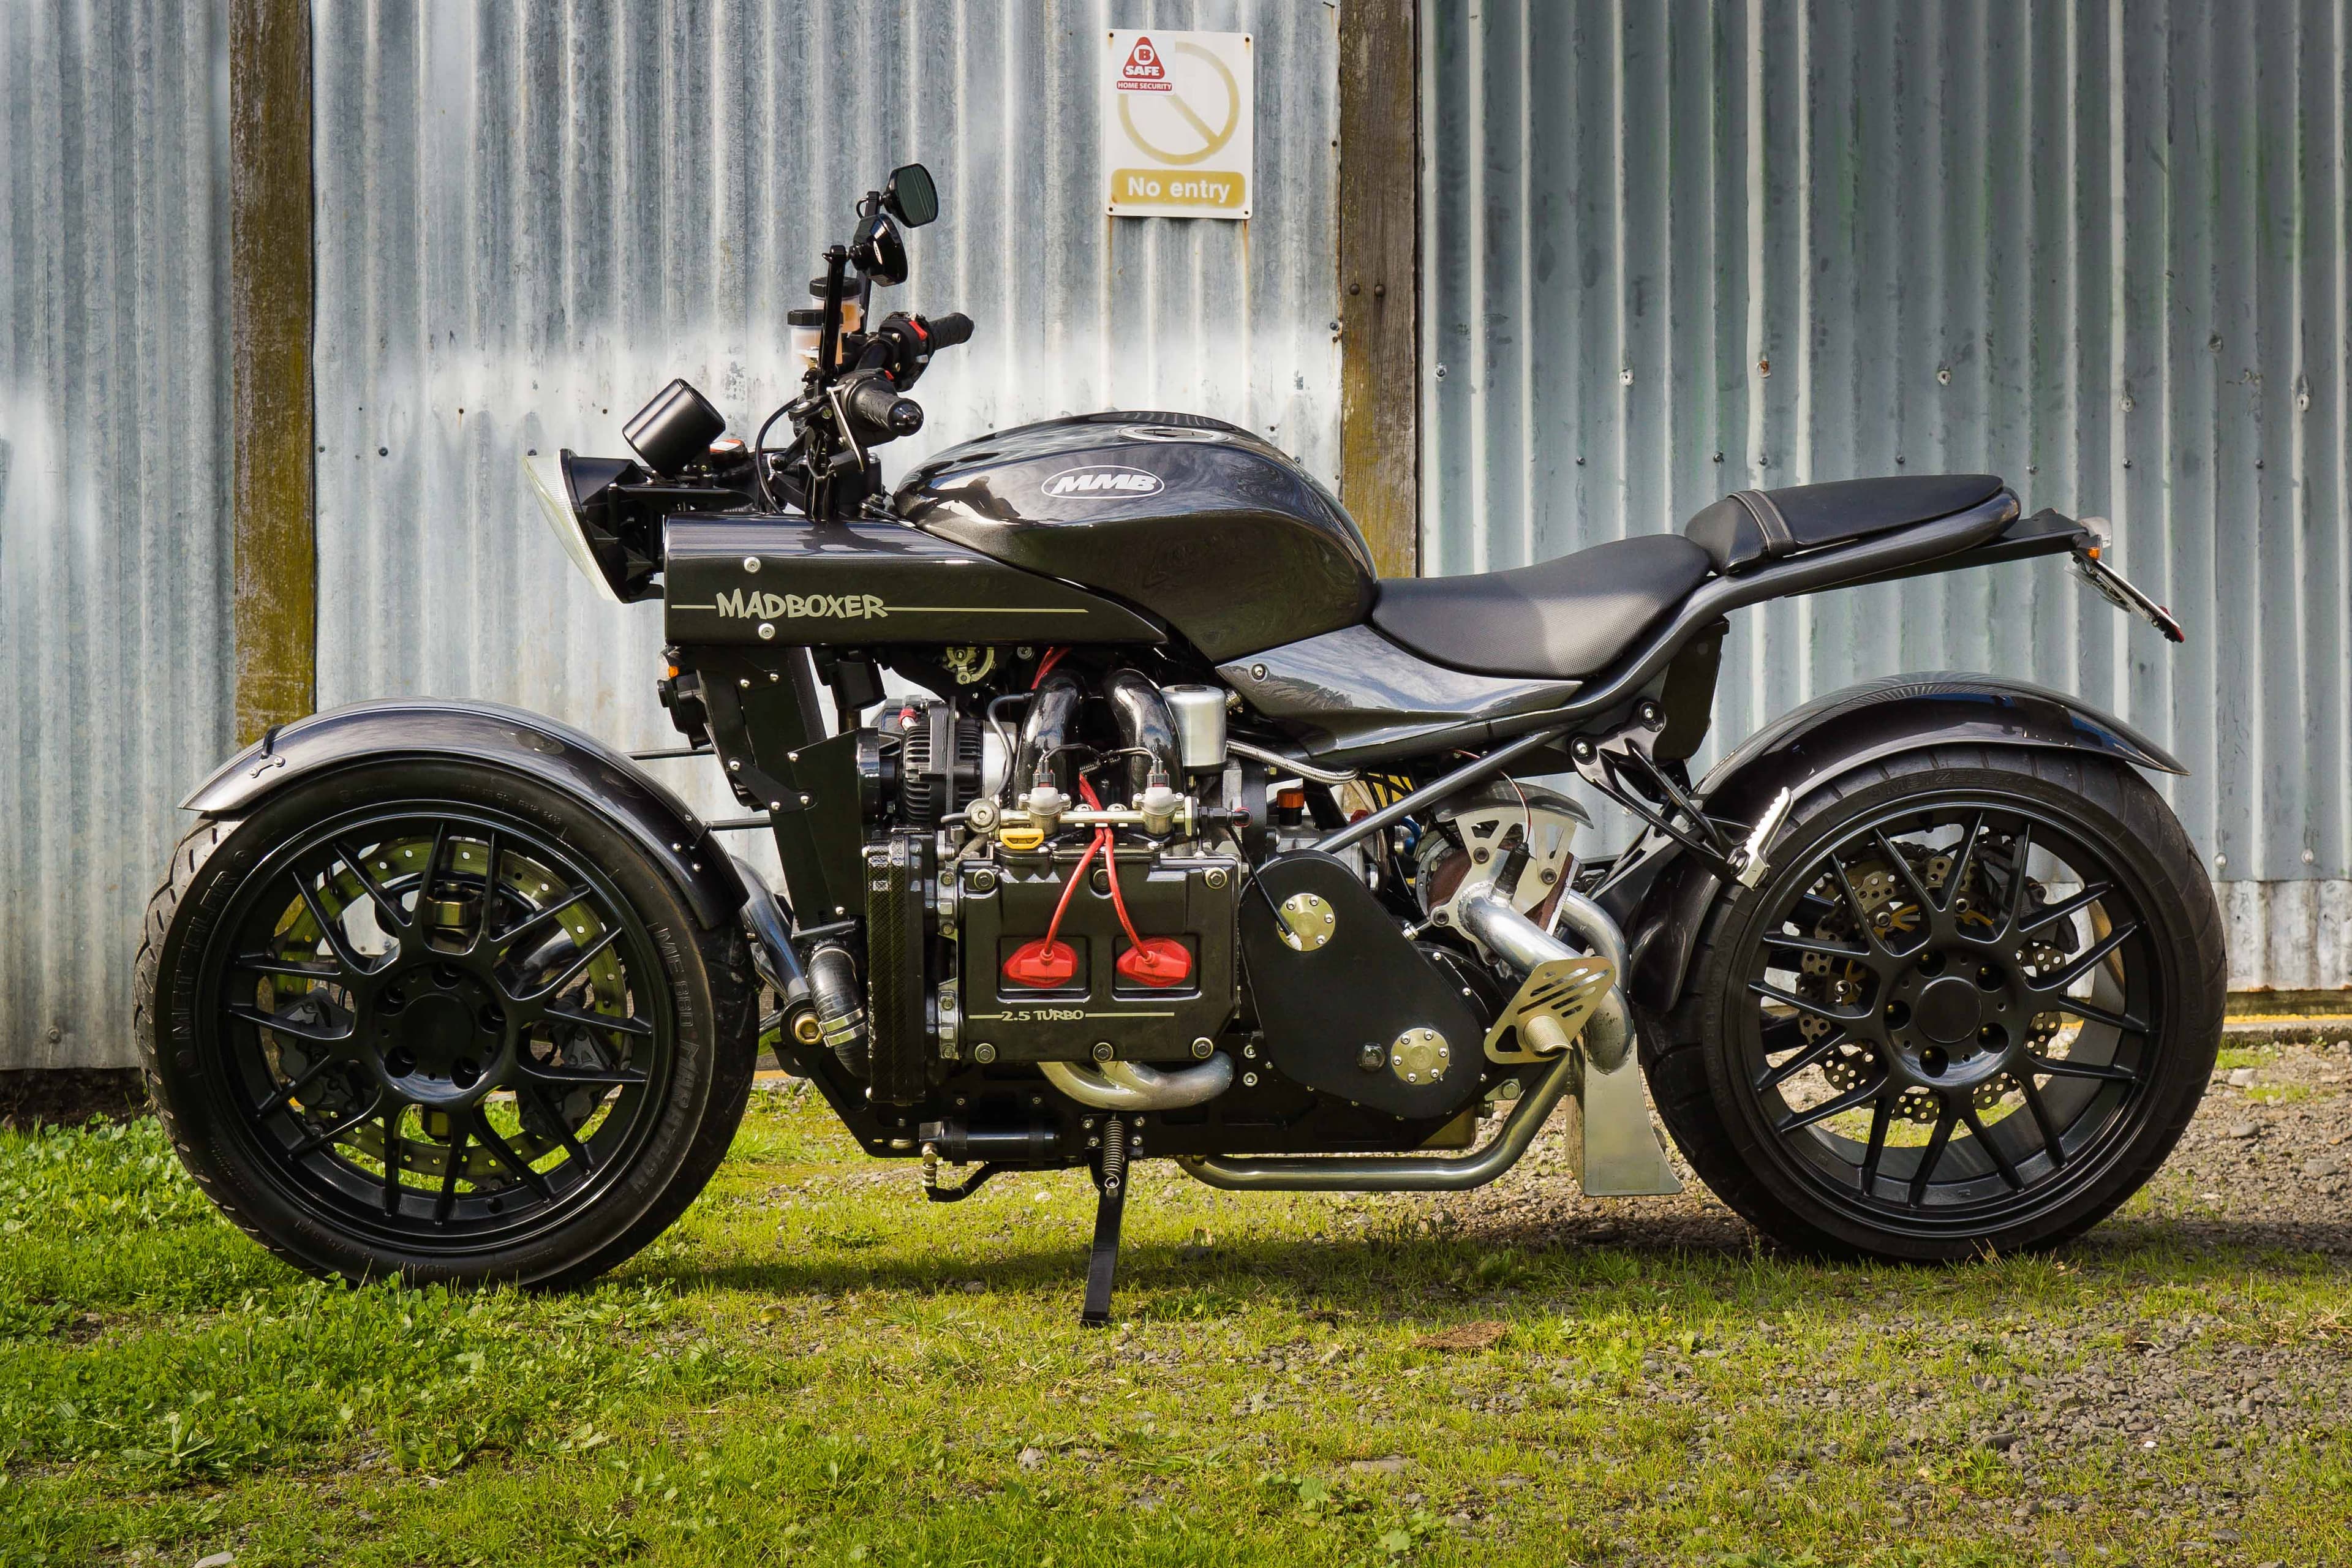 The Madboxer is a Subaru WRX Powered Motorcycle and We Love It